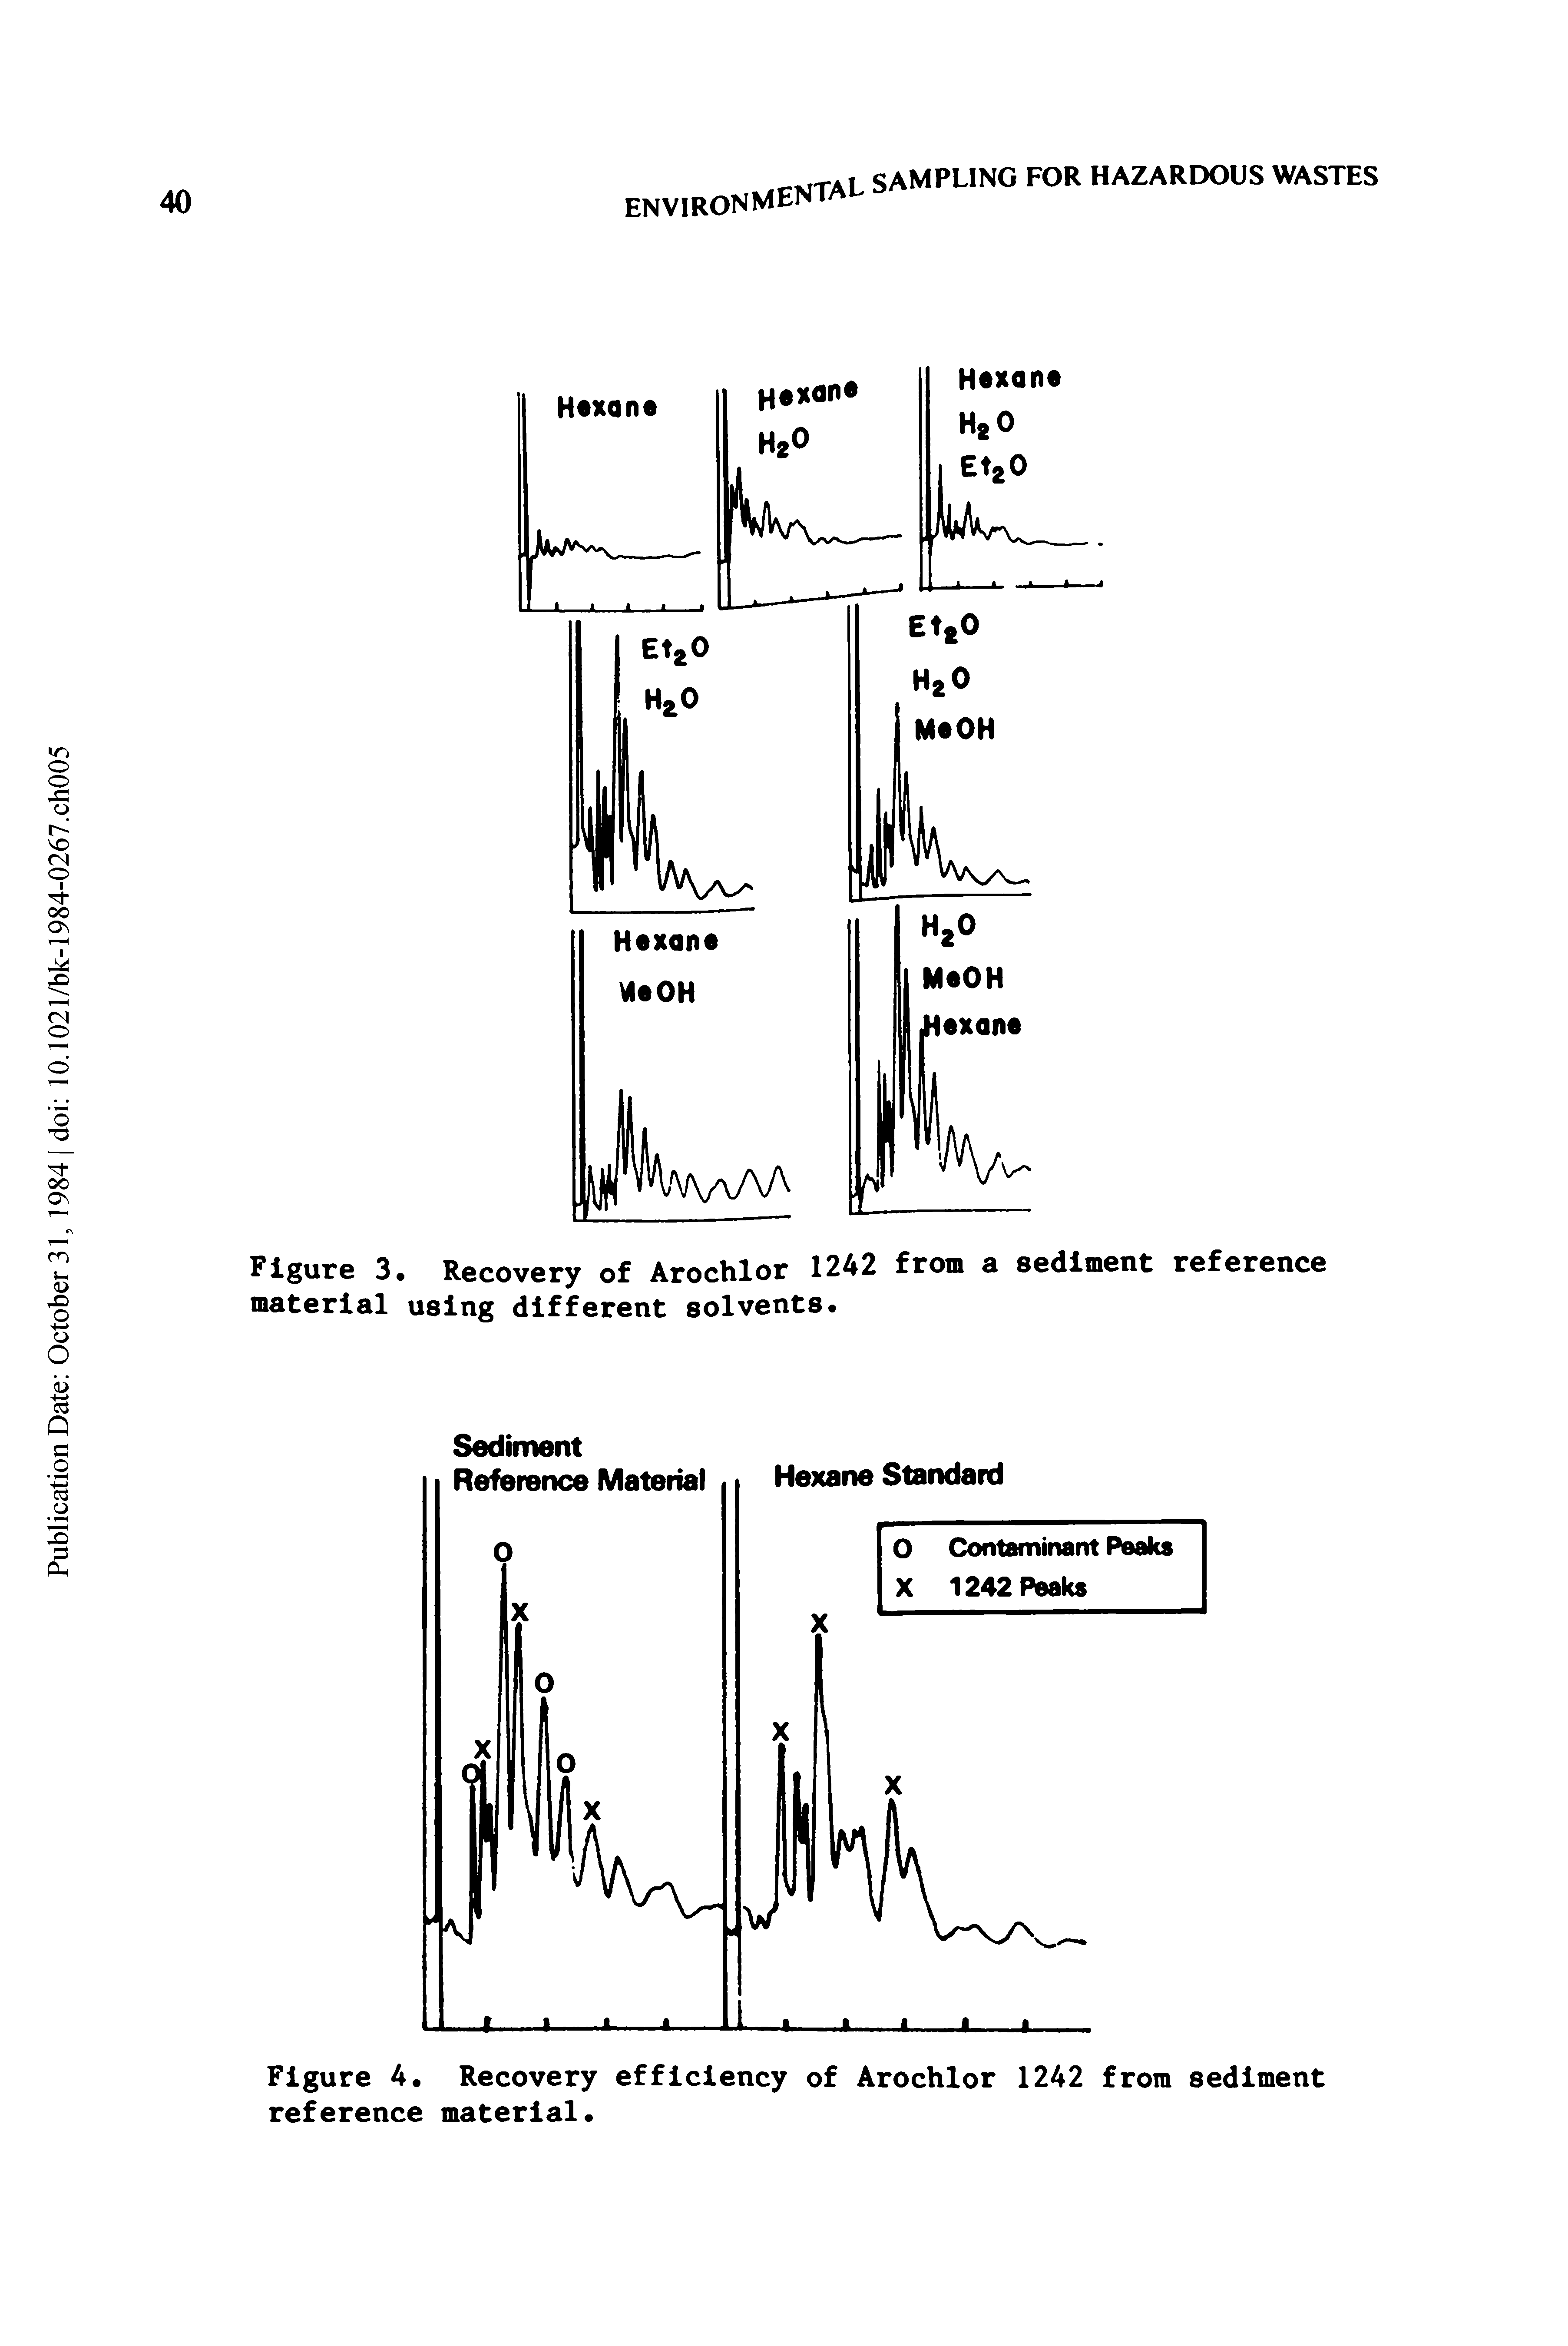 Figure 3. Recovery of Arochlor 1242 from a sediment reference material using different solvents.